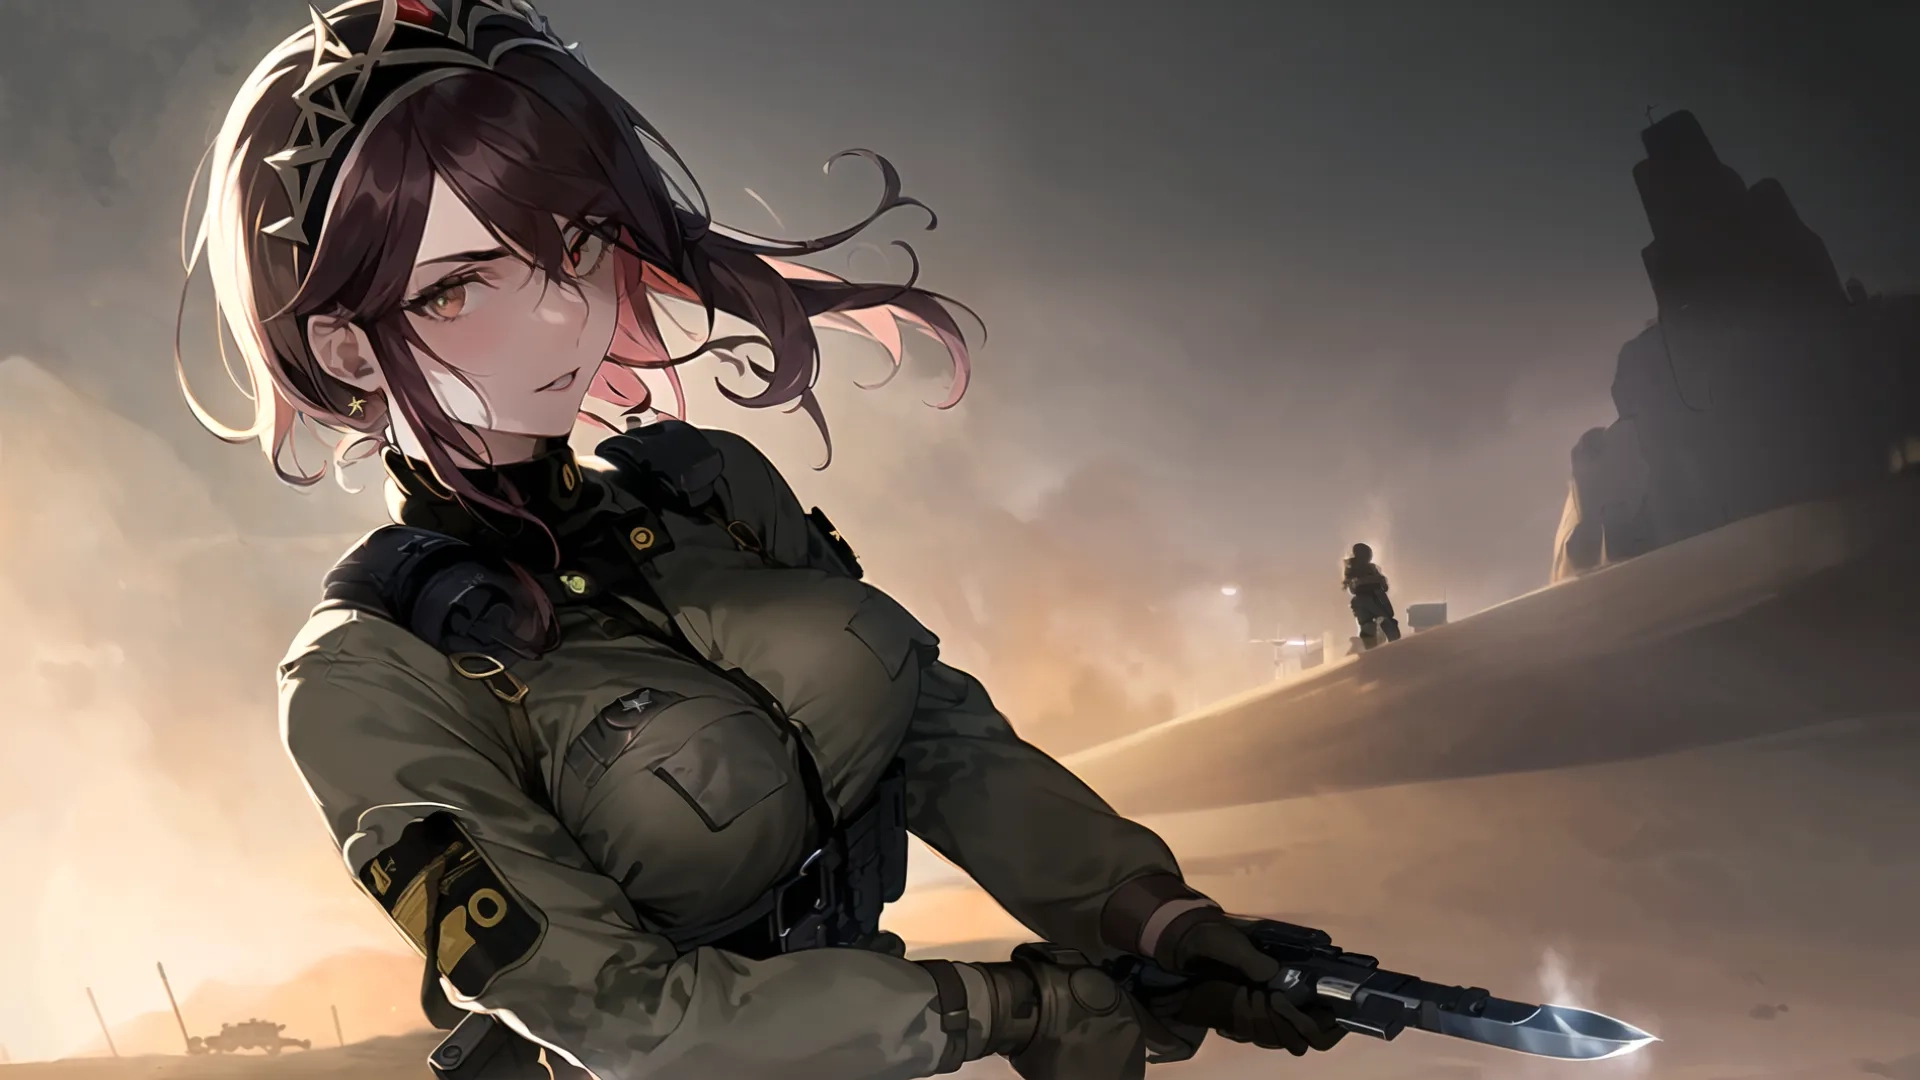 an army girl with two knives in her hand and looking down in a snowy field with mountains behind her and dusty clouds in the sky behind her
